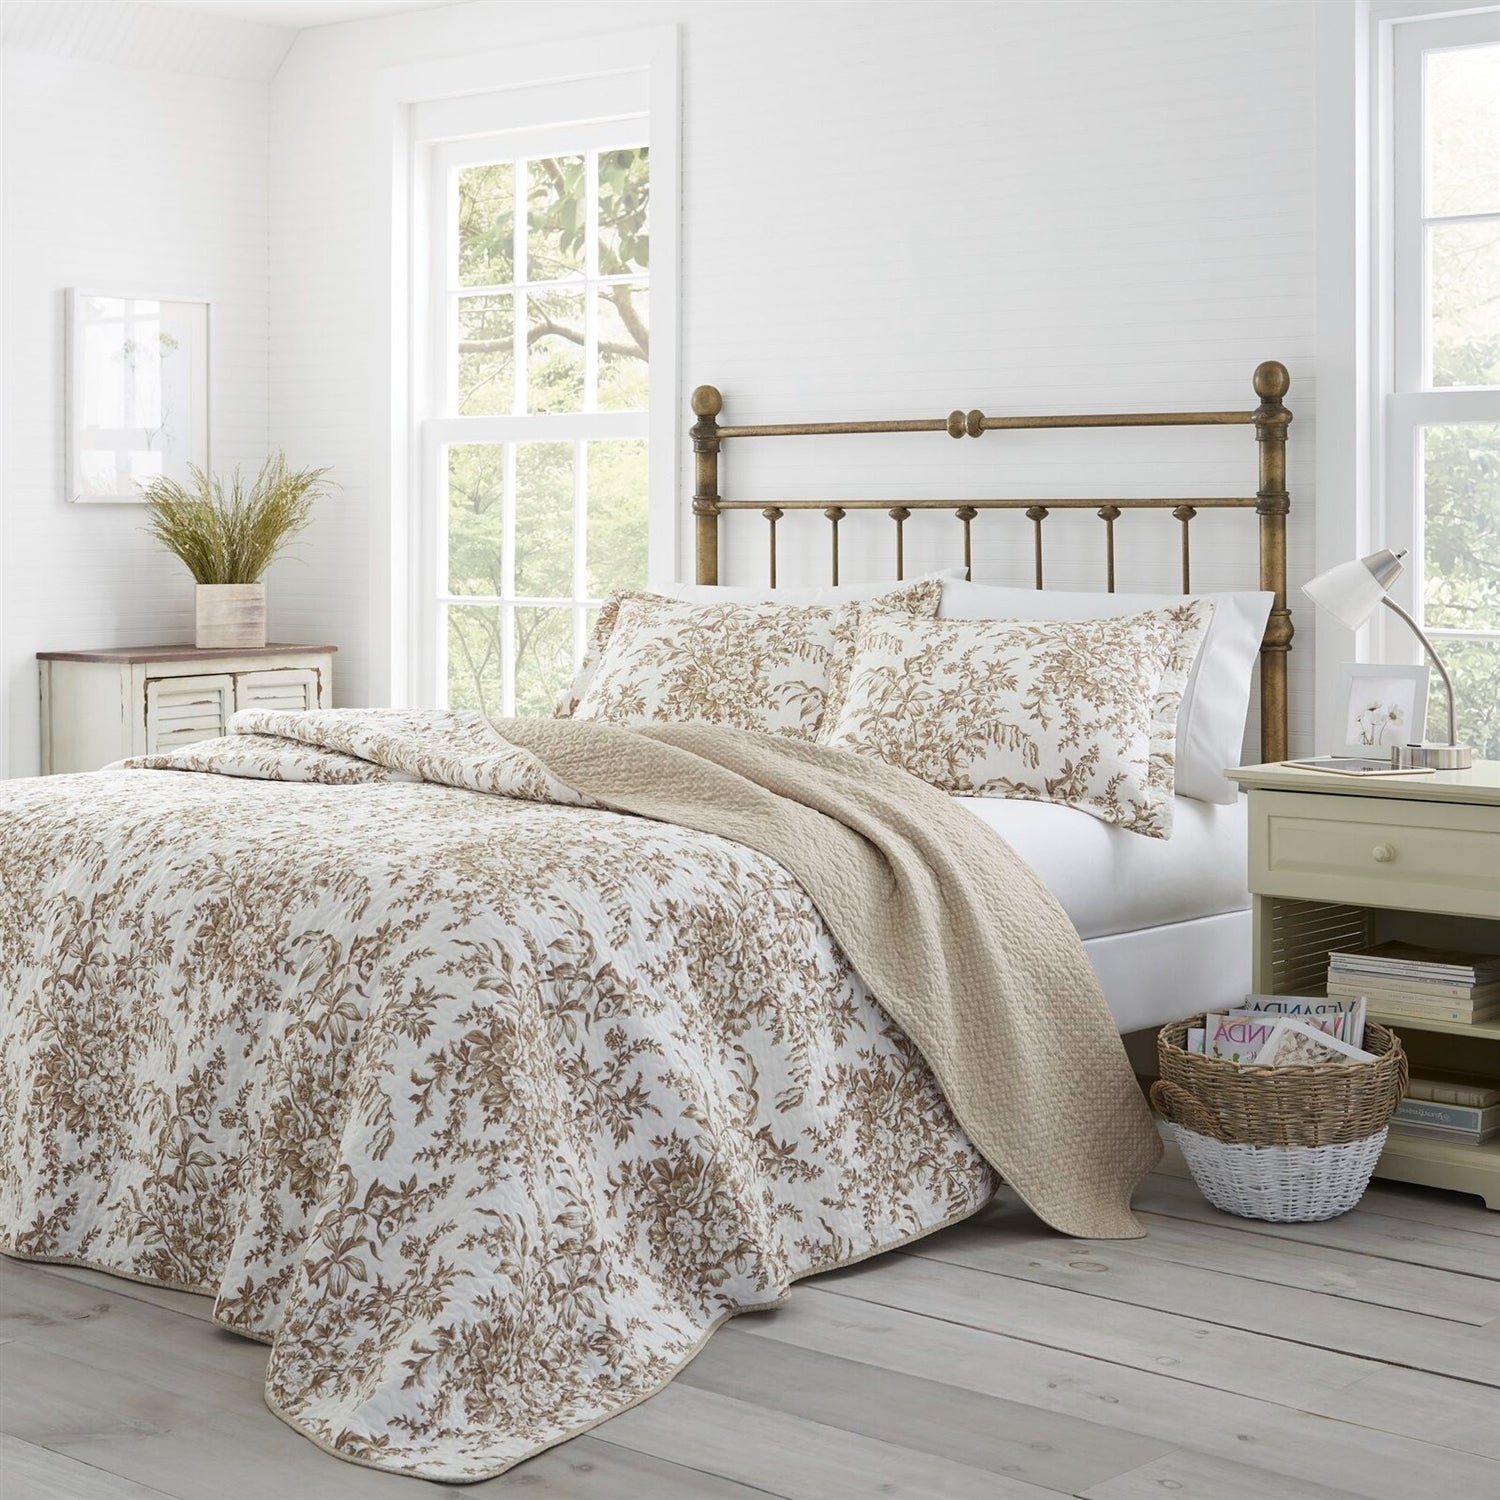 Bedroom > Quilts & Blankets - Full/Queen 3 Piece Bed-in-a-Bag Bohemian Tan Beige Floral Cotton Quilt Set